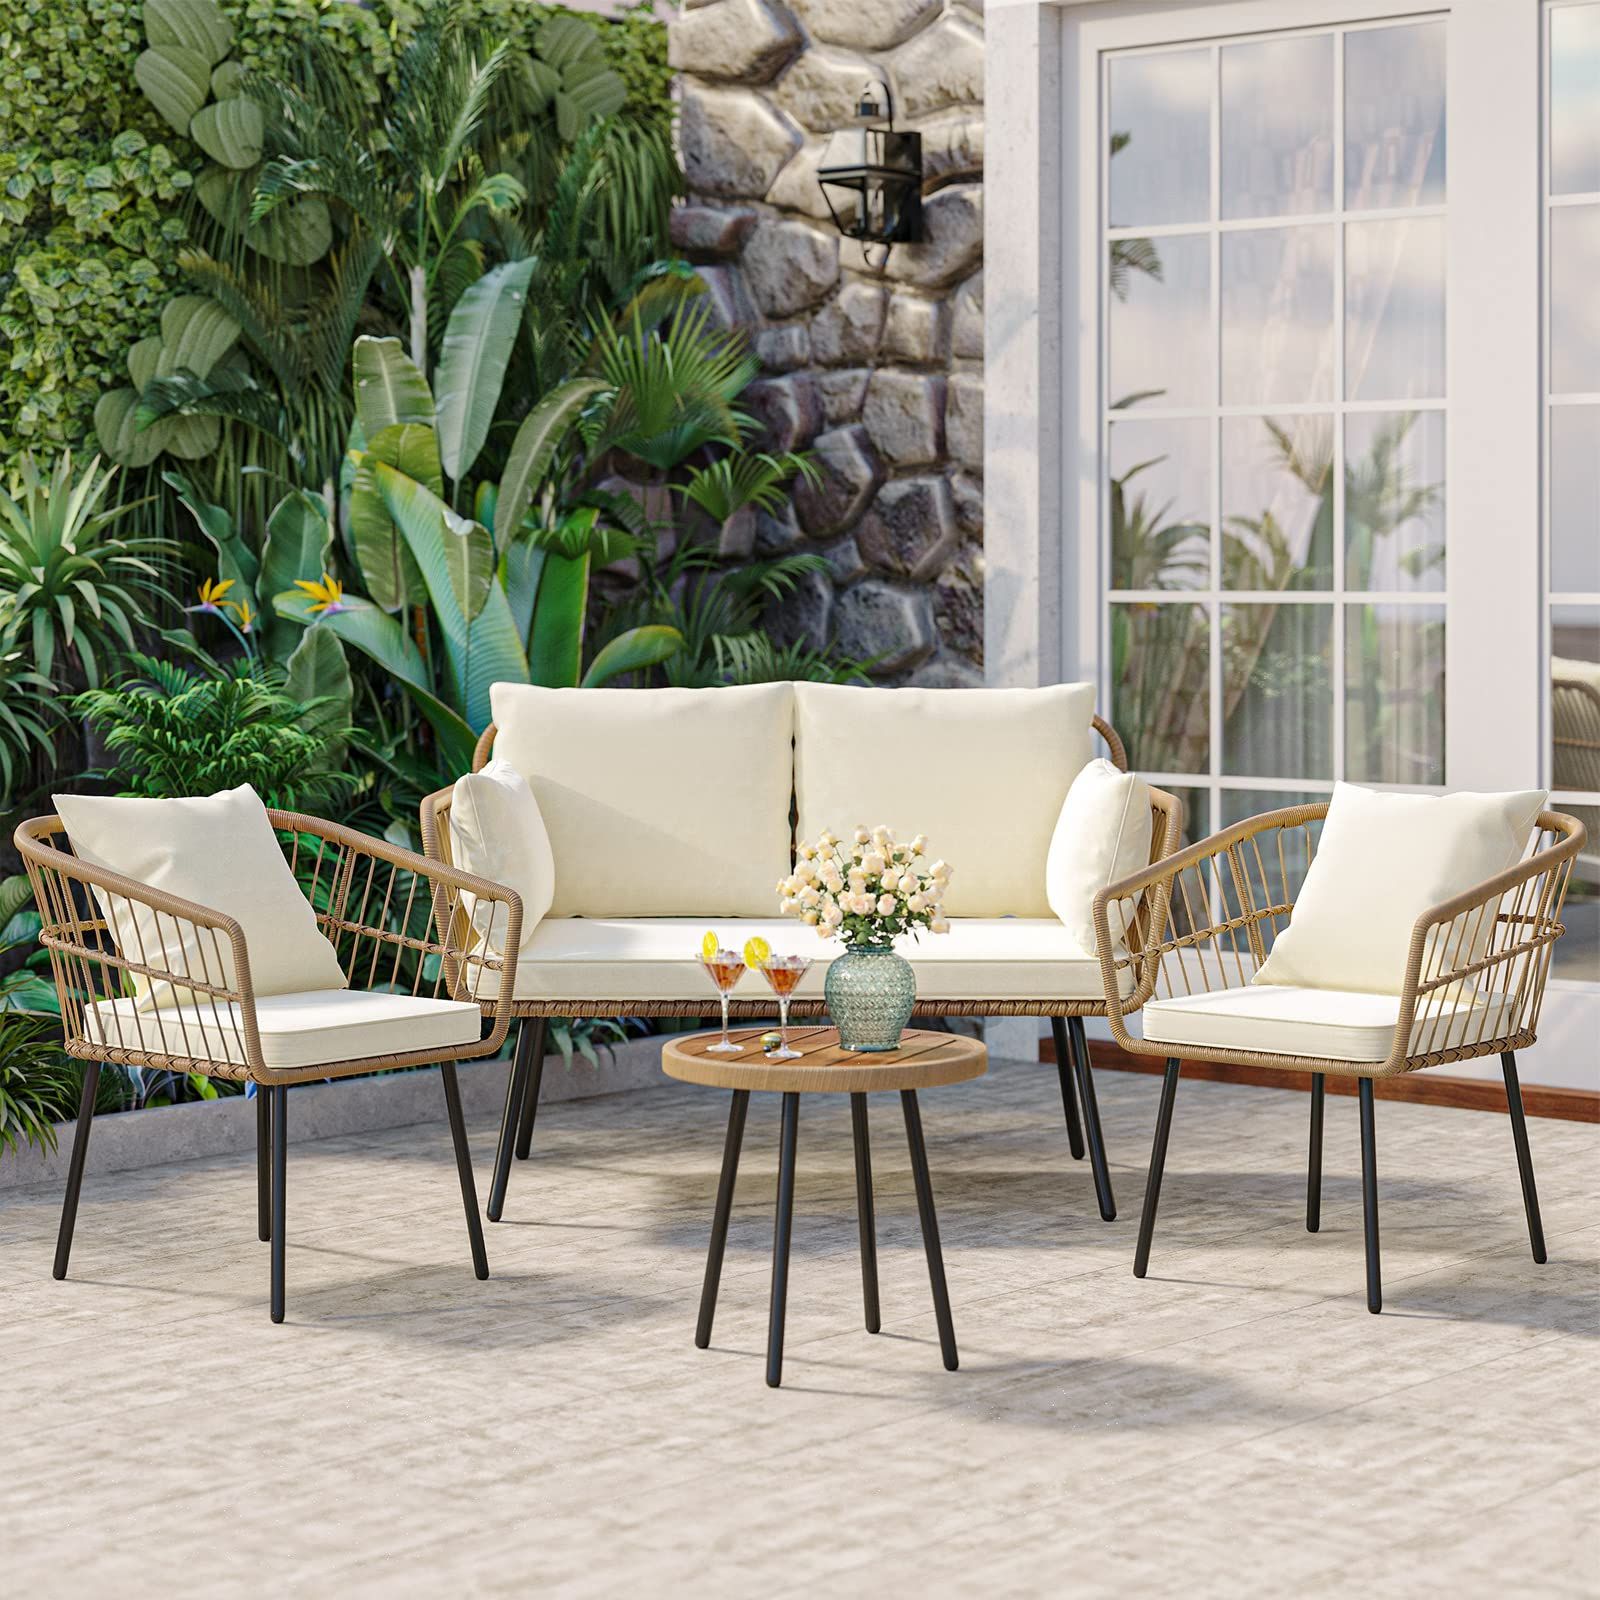 Best And Newest Balcony And Deck With Soft Cushions Inside Amazon: Yitahome 4 Pieces Patio Furniture Set, Wicker Balcony Bistro  Set, Outdoor All Weather Rattan Conversation Set With Loveseat Chairs Table Soft  Cushions For Backyard, Pool, Deck, Garden – Beige : Patio, Lawn (Photo 1 of 15)